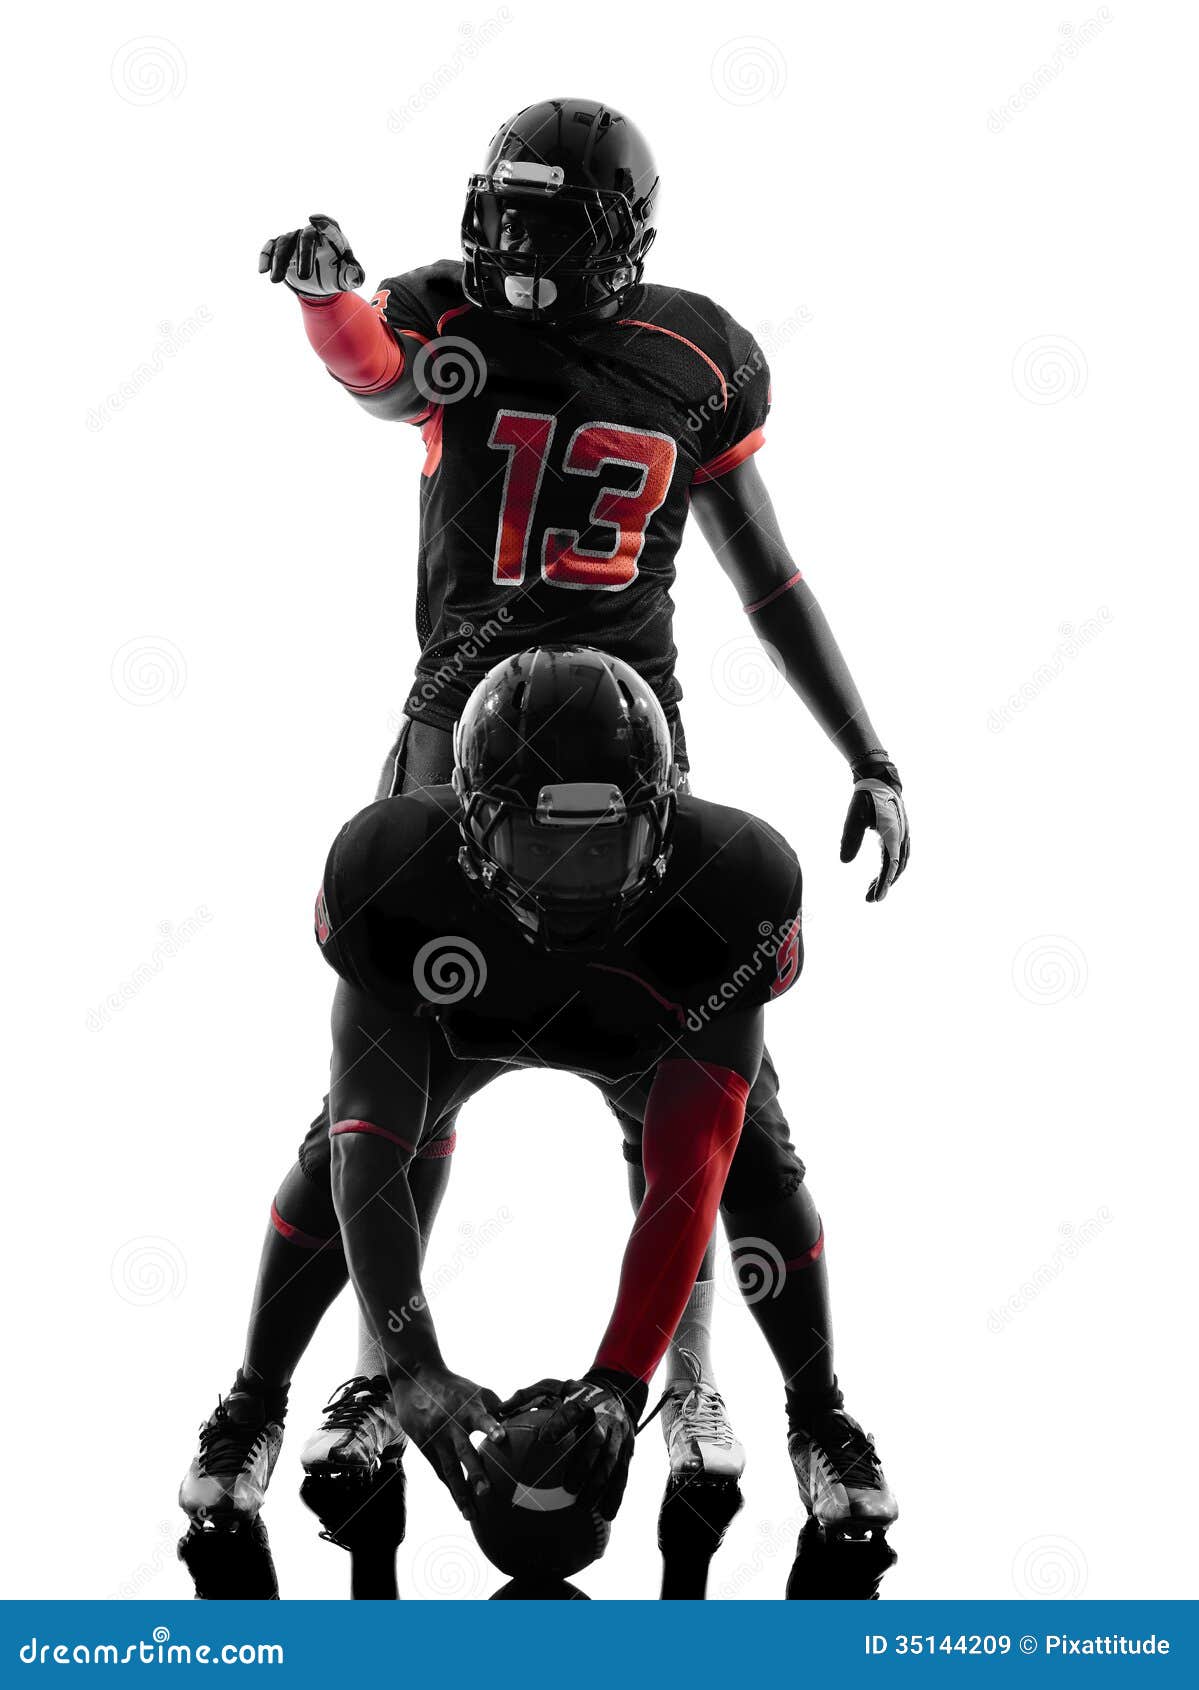 Two American Football Players on Scrimmage Silhouette Stock Image ...